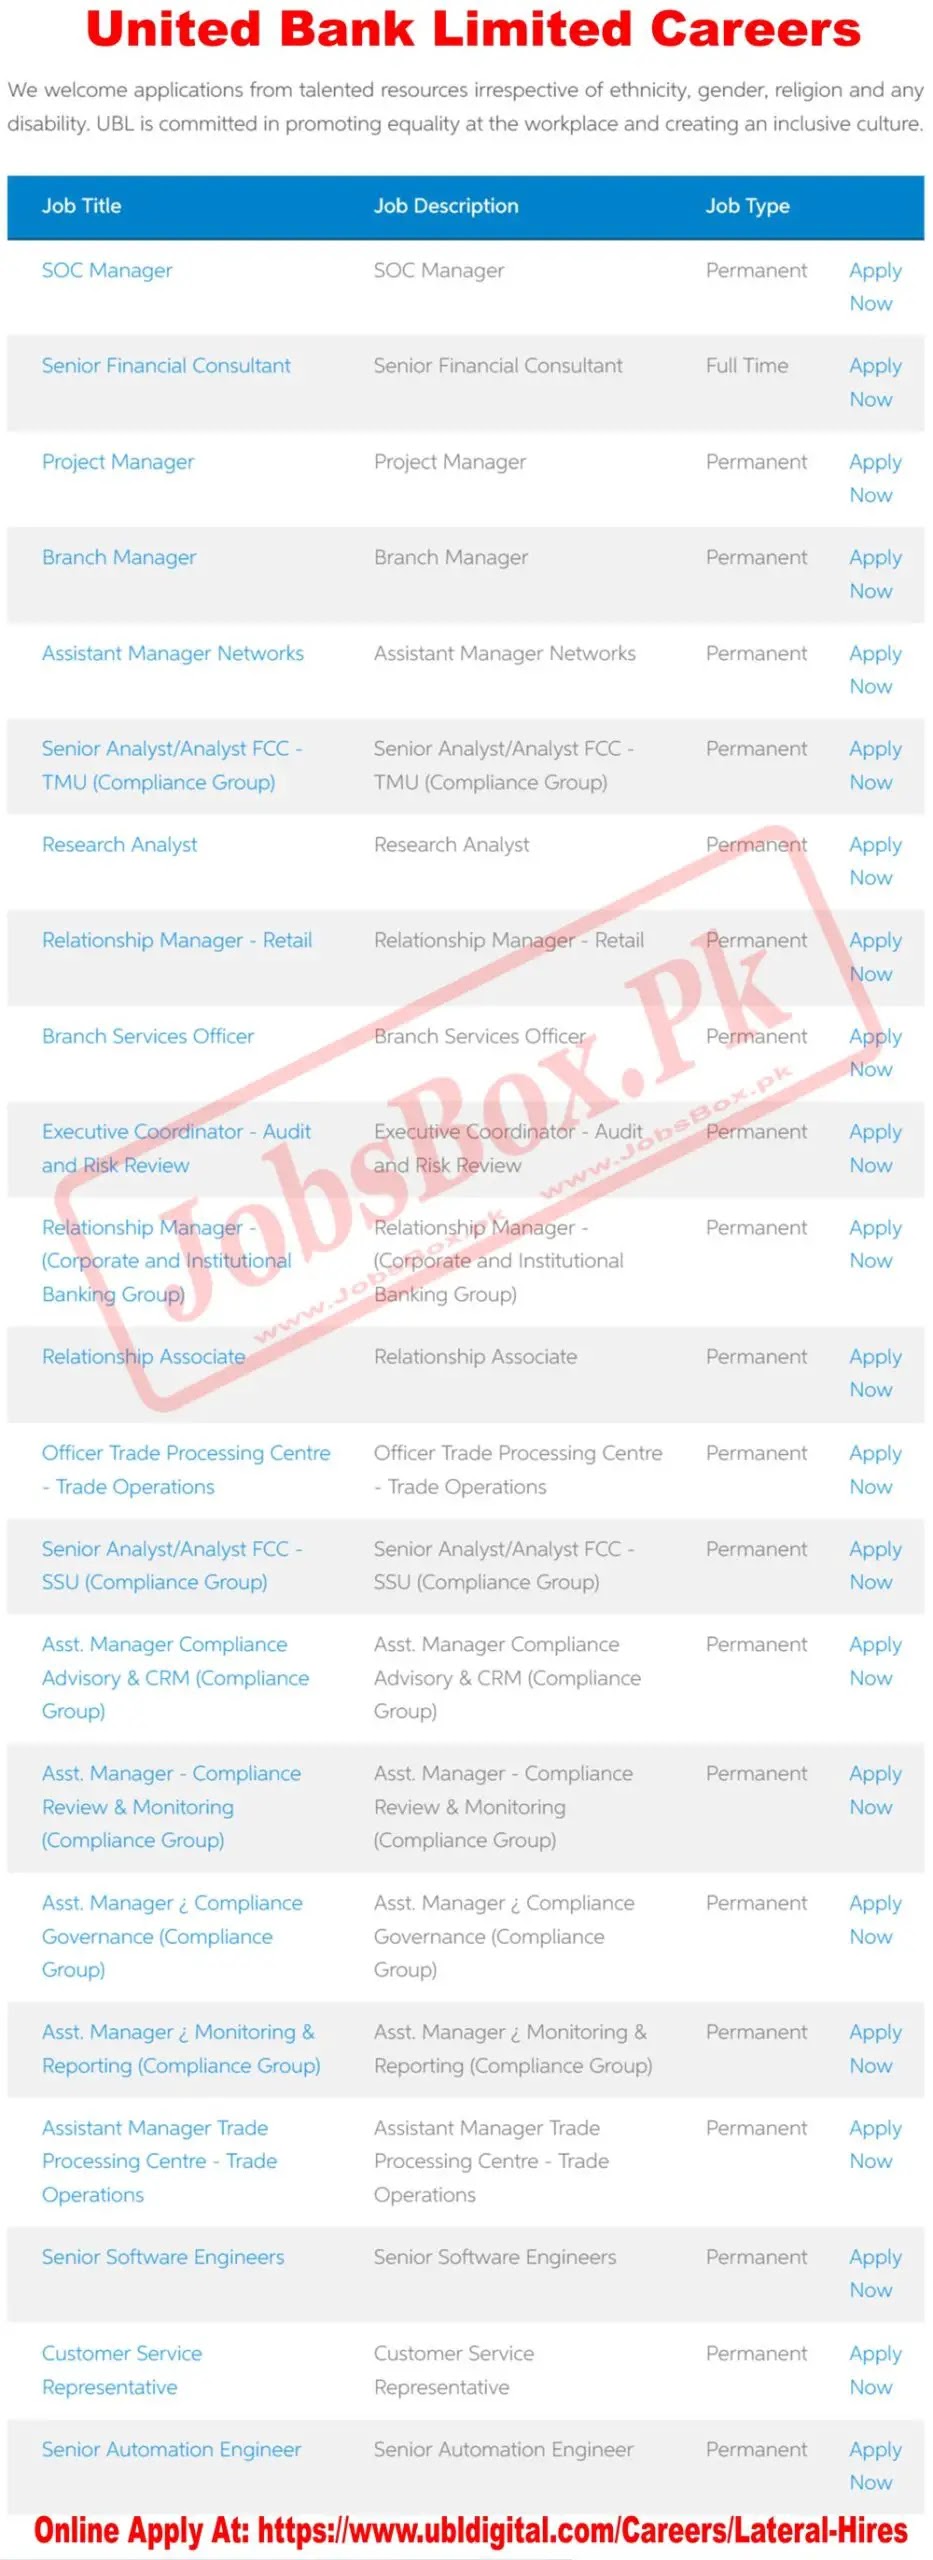 United Bank Limited UBL Jobs 2023|Bank Jobs 2023